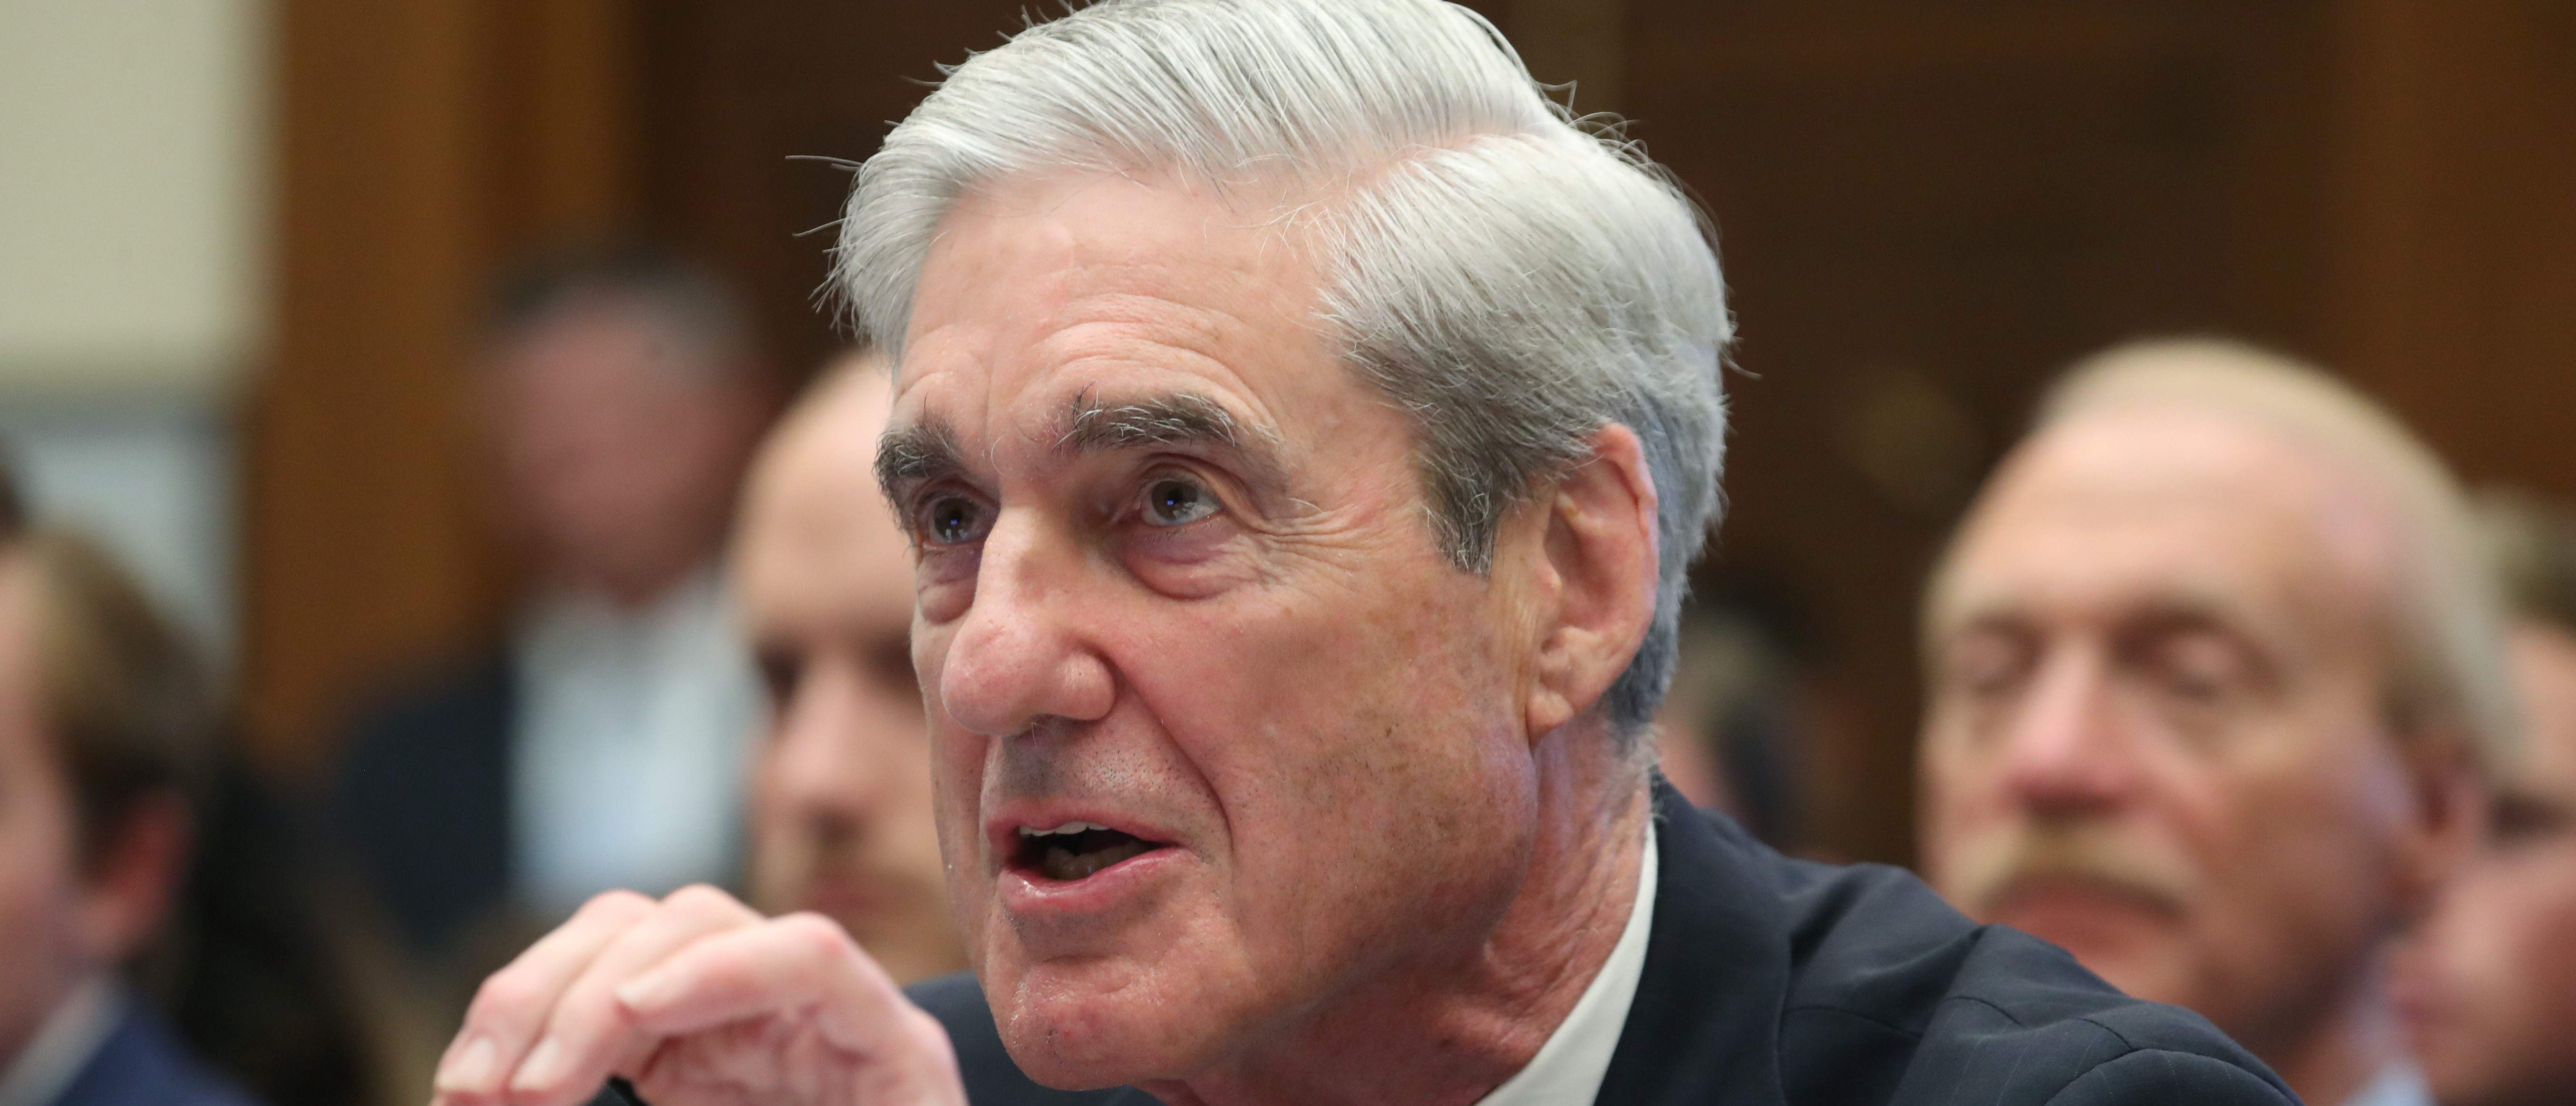 Former Special Counsel Robert Mueller testifies before the House Intelligence Committee at a hearing on the Office of Special Counsel's investigation into Russian Interference in the 2016 Presidential Election. (REUTERS/Leah Millis)